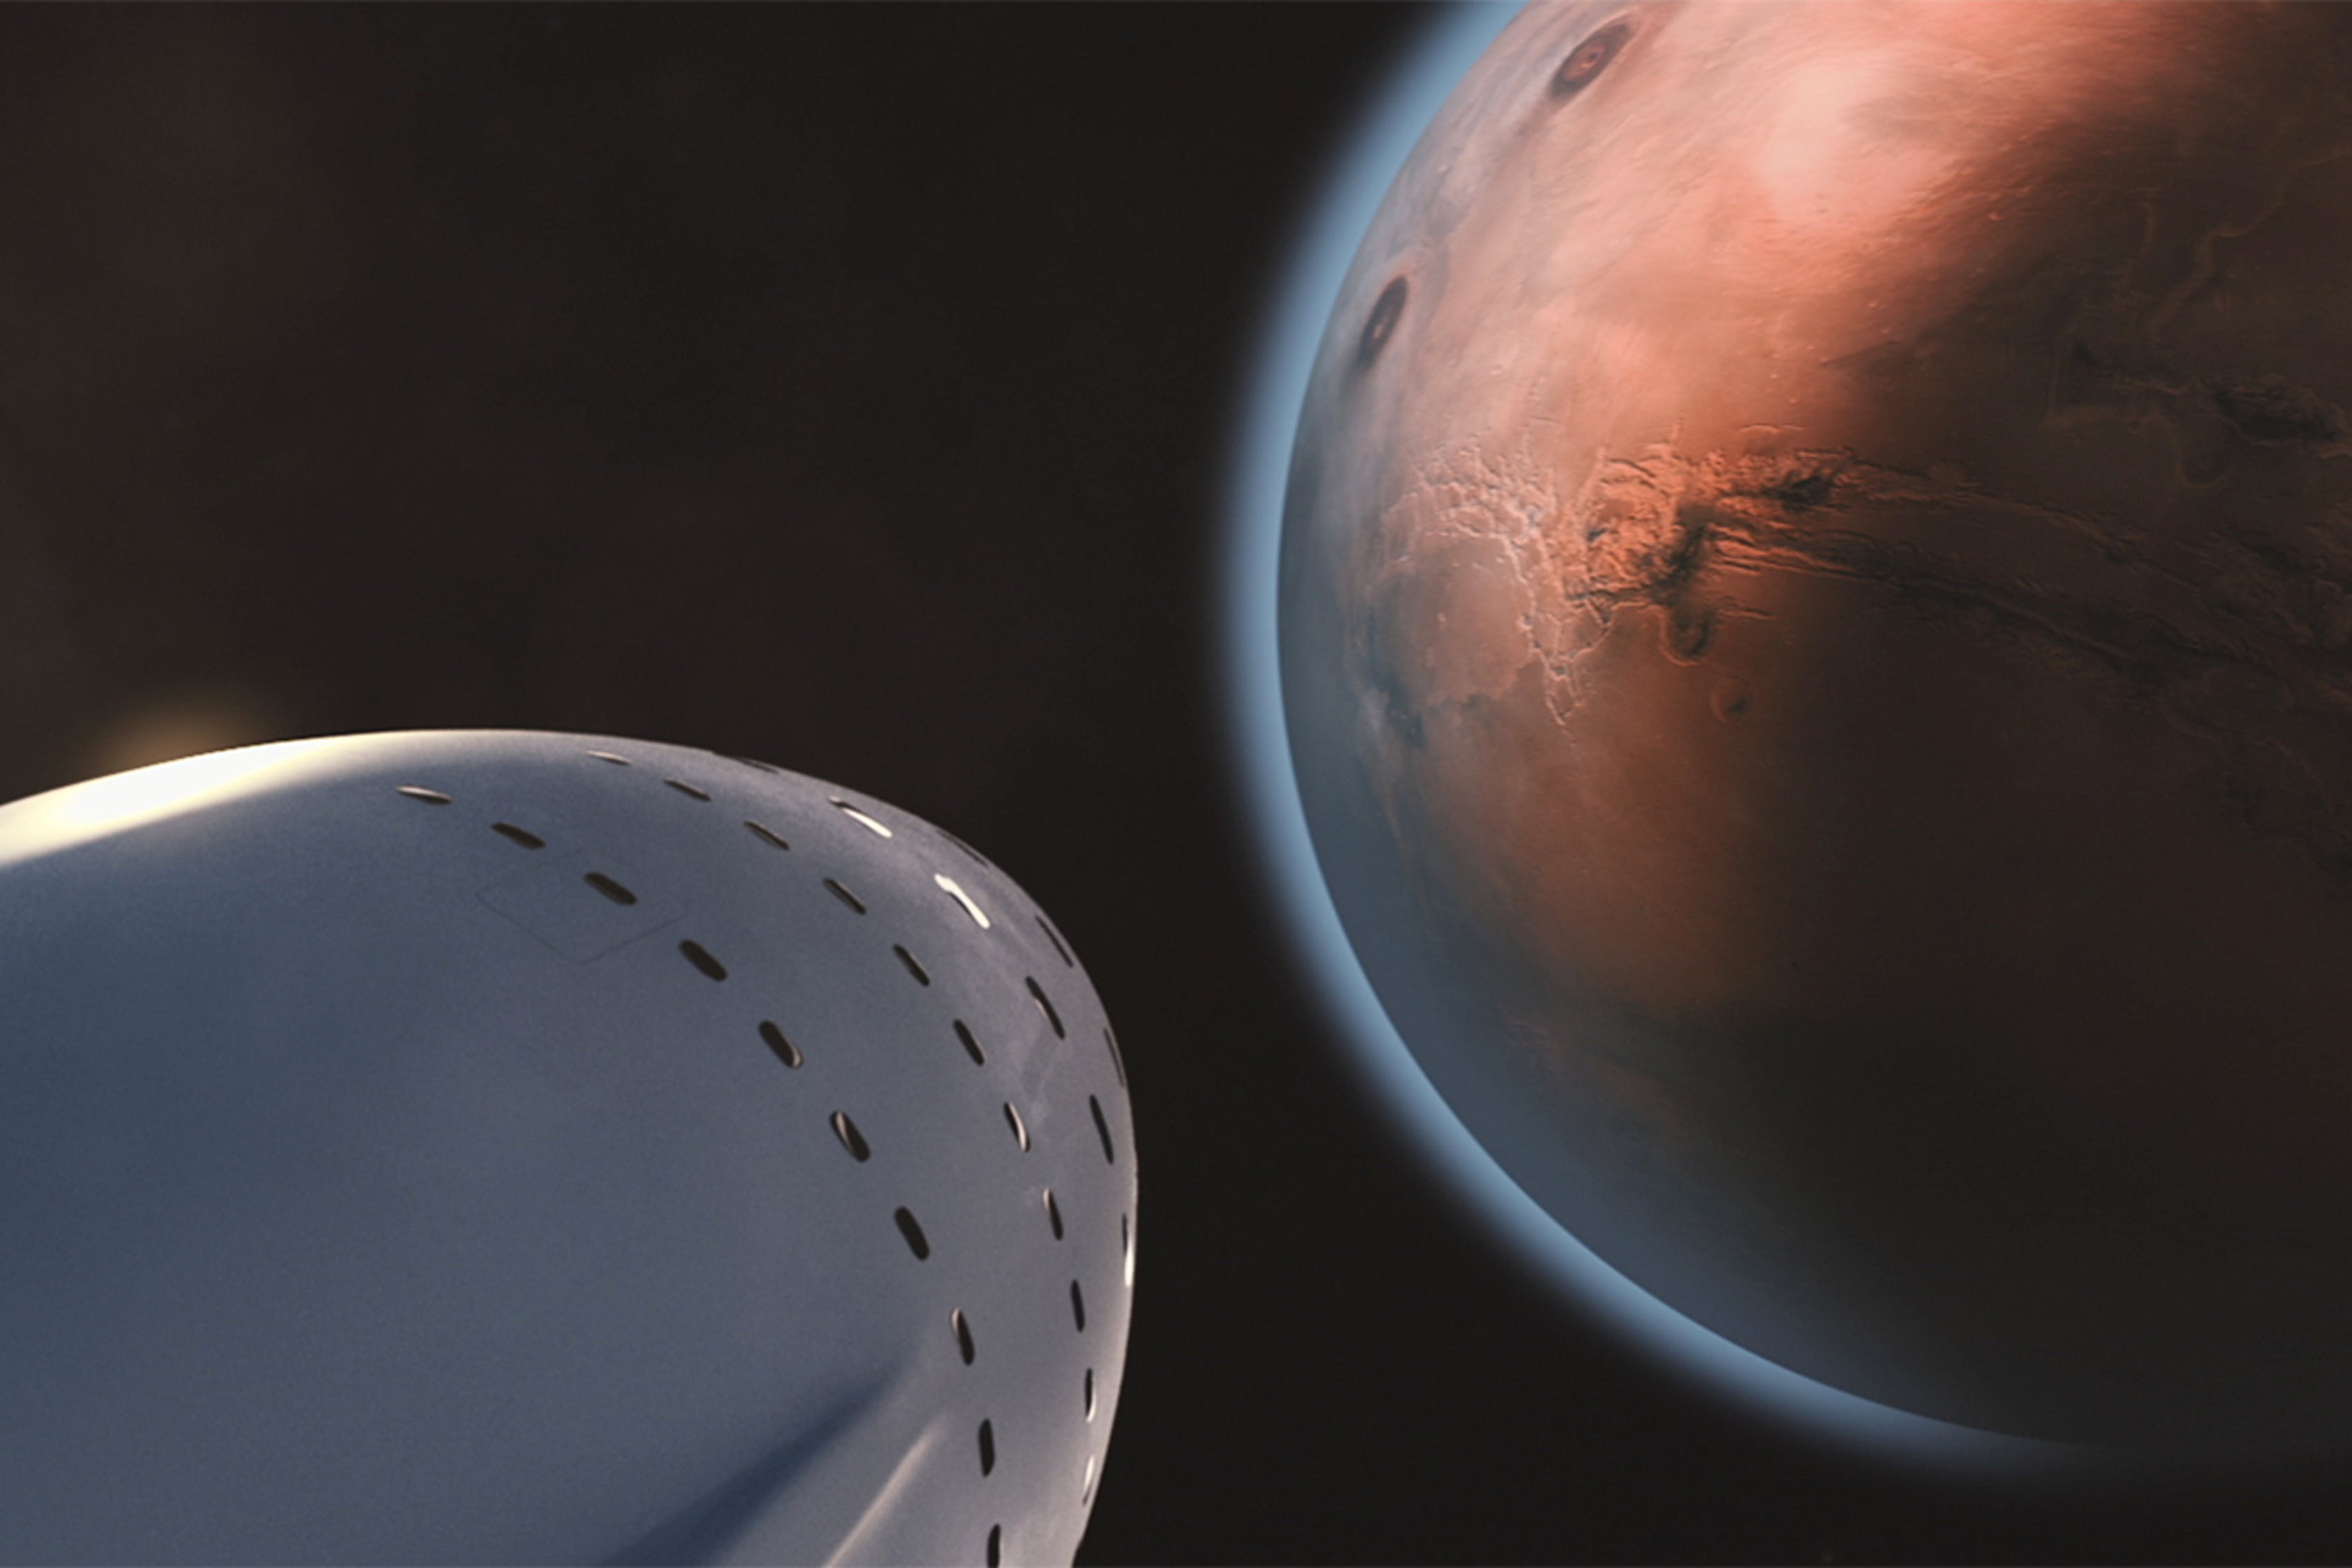 What Is The Thesis Statement Of The Research Report Life On Mars?